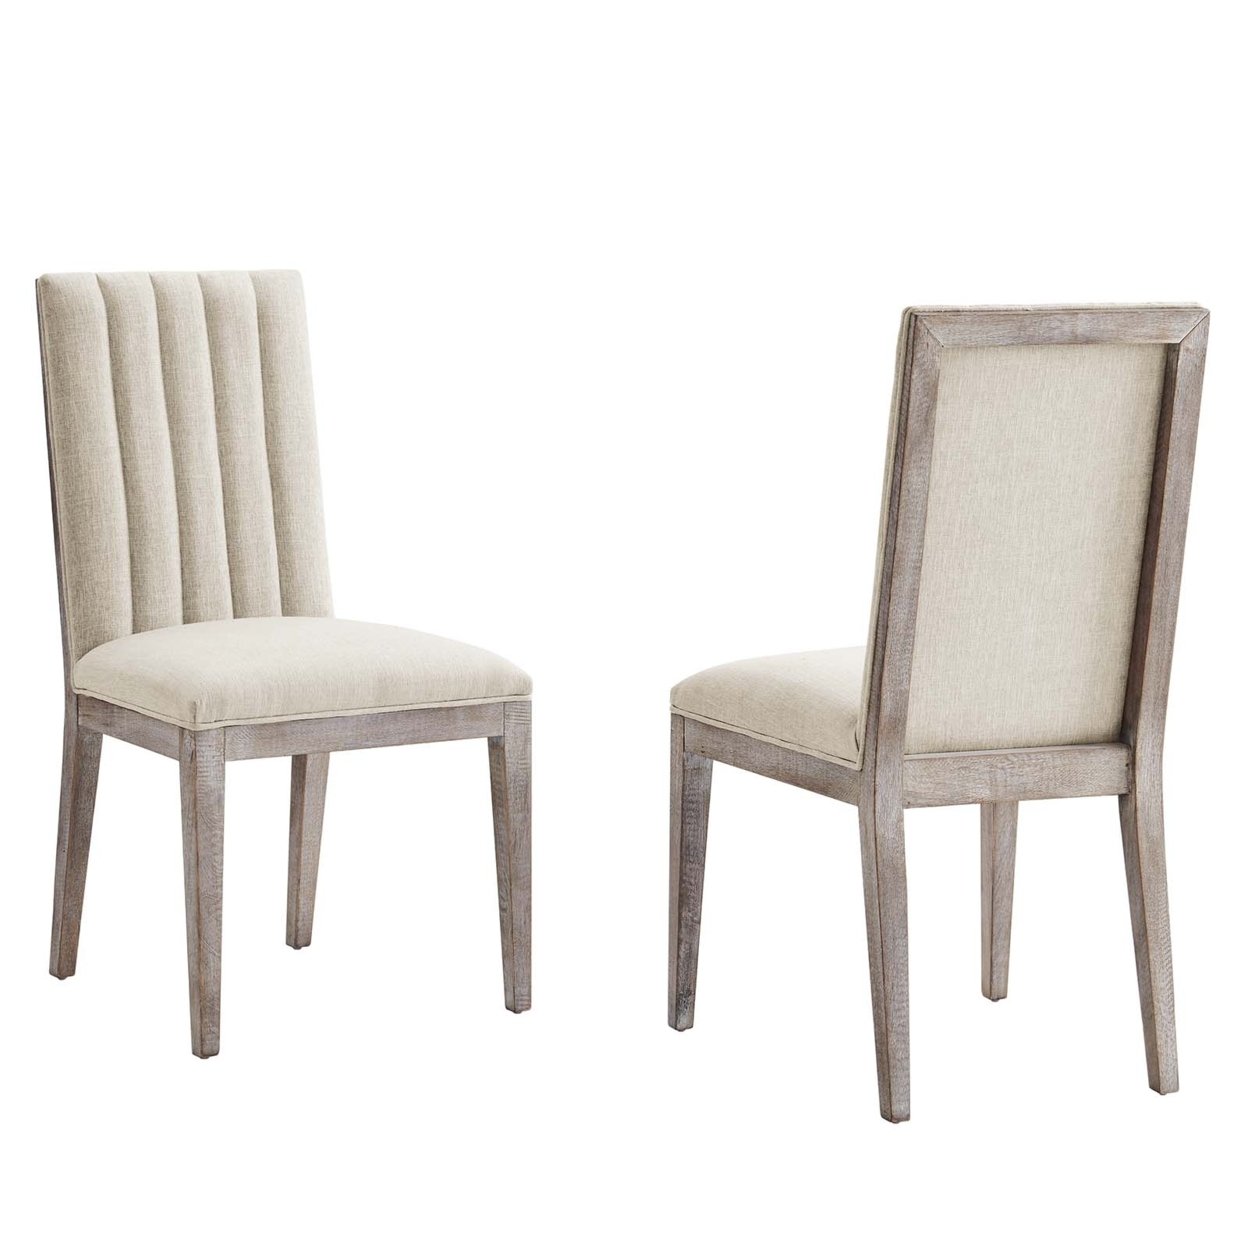 Maisonette French Vintage Tufted Fabric Dining Side Chairs Set Of 2, Beige